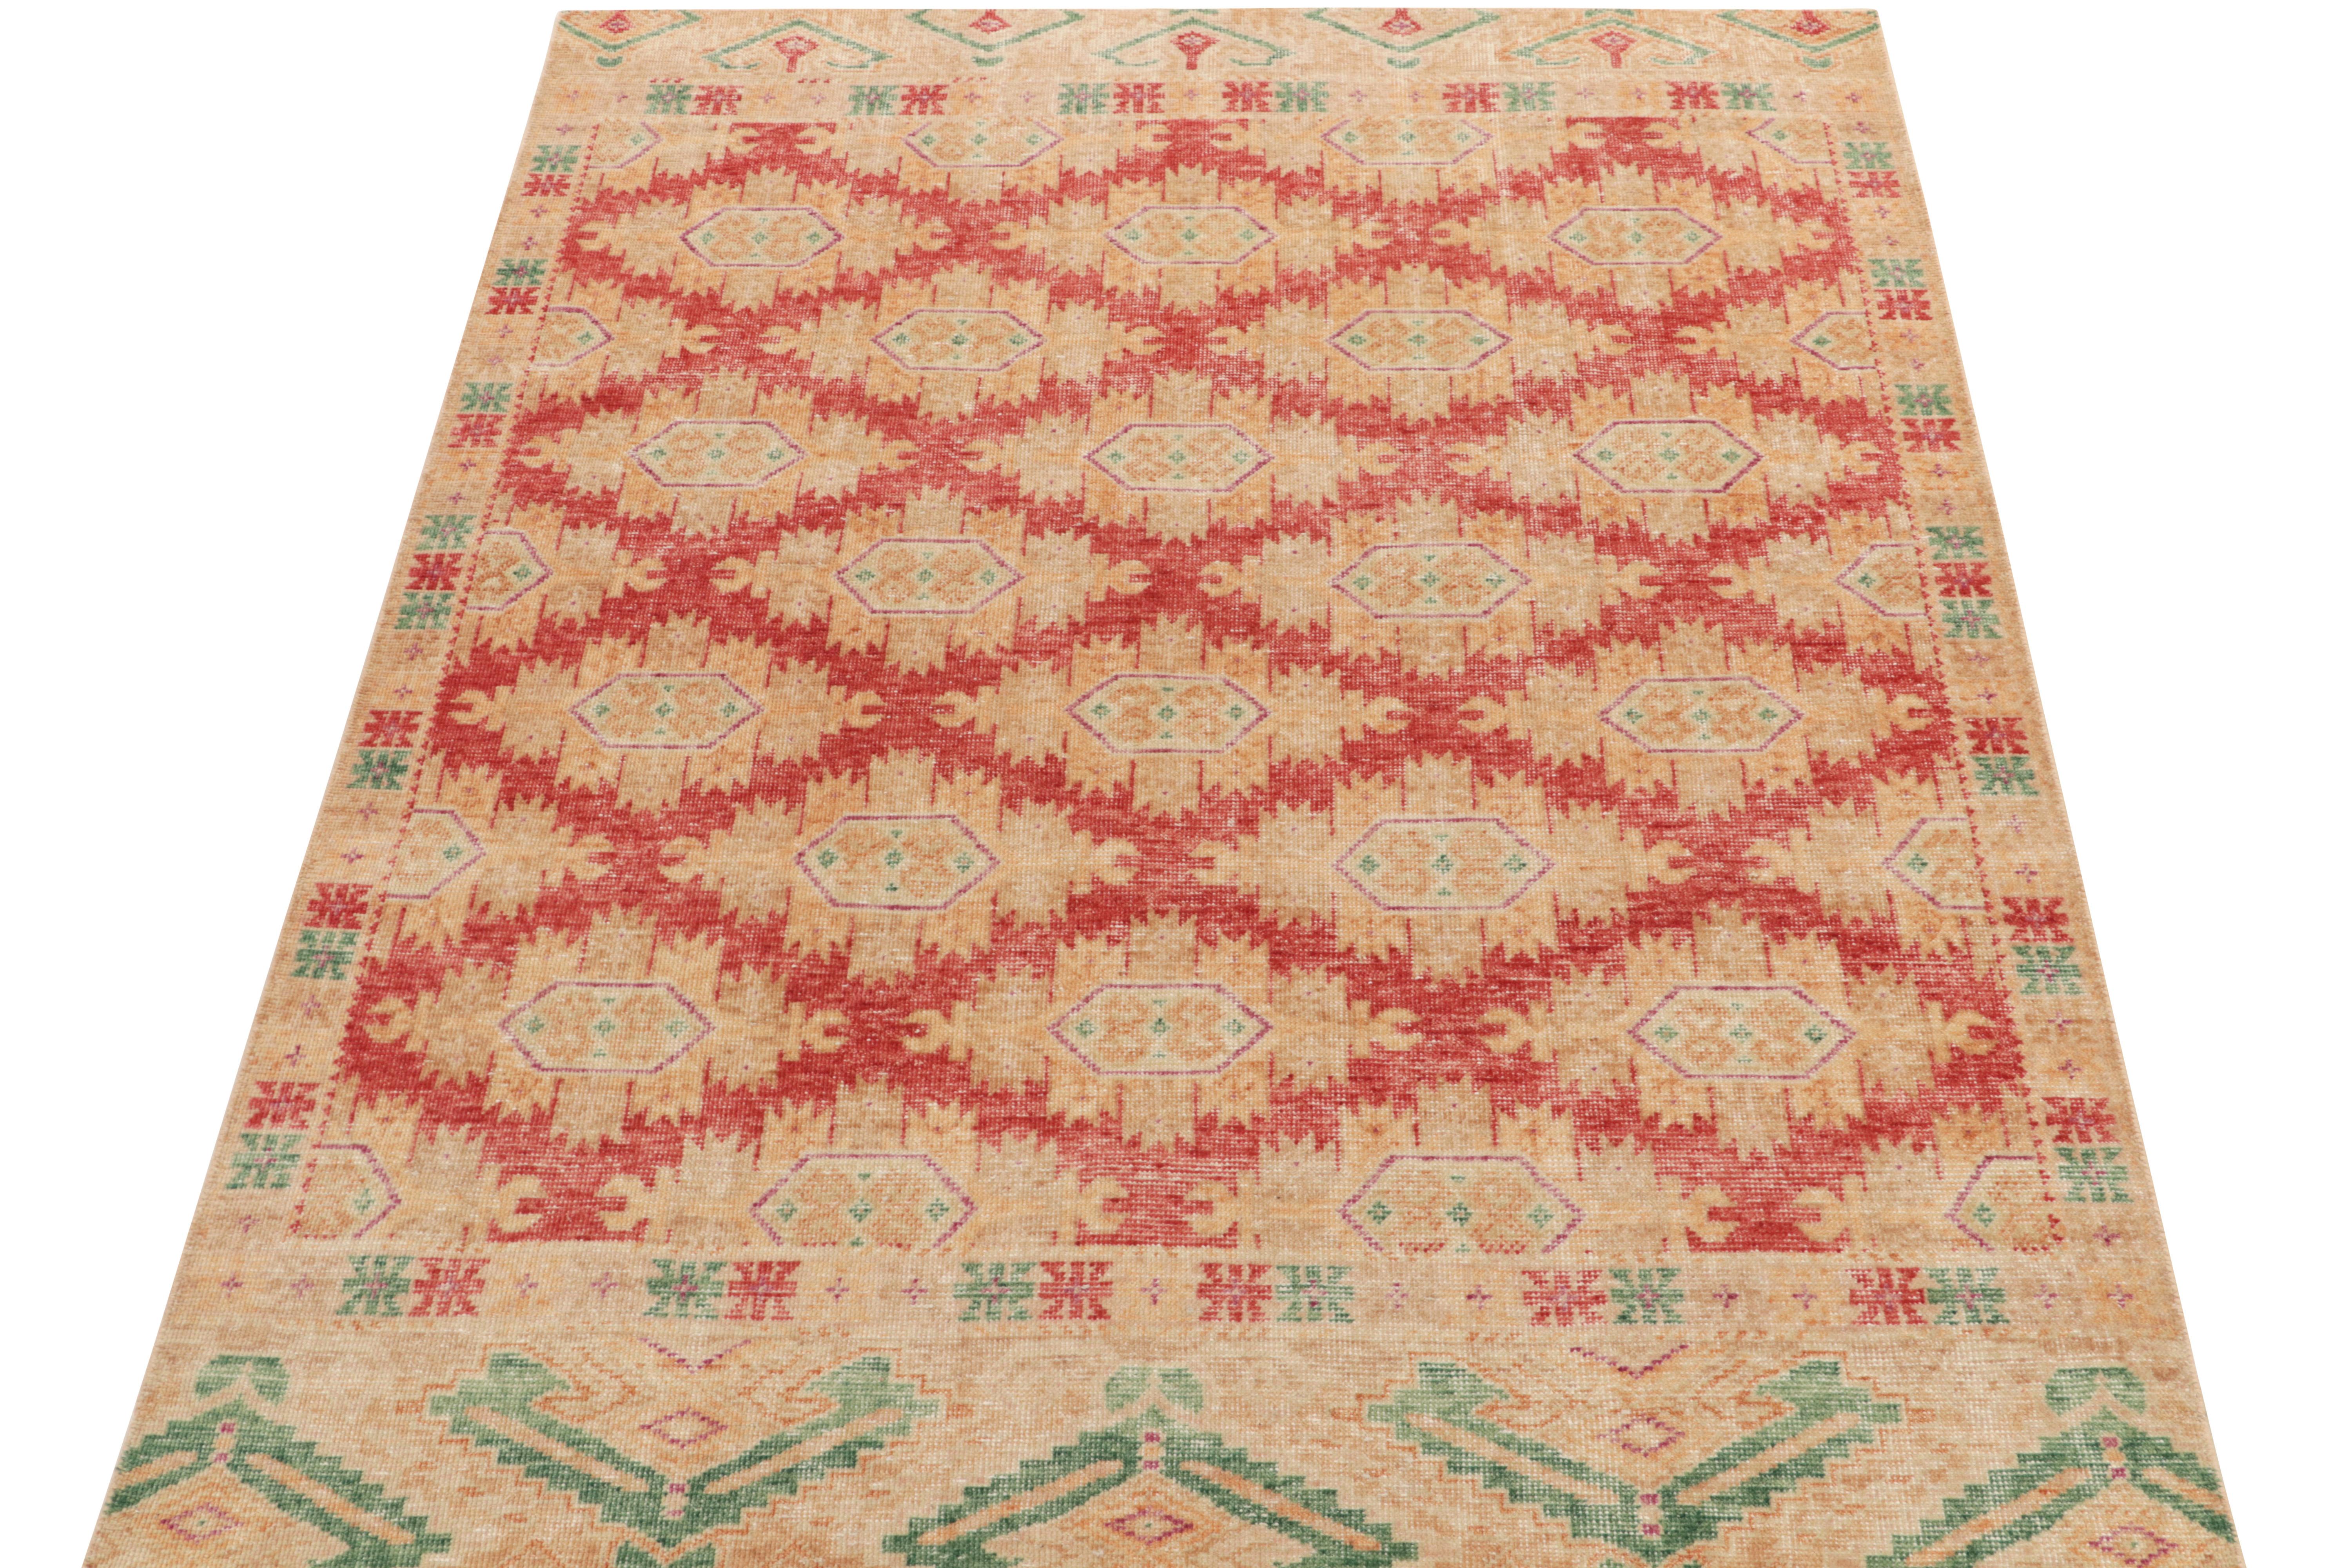 A 6x8 distressed style rug from Rug & Kilim’s Homage collection enjoying a montage of geometric patterns & tribal motifs. Hand-knotted in texturally fine, low-height wool pile, the vision enjoys a visually arresting appeal with the traditional